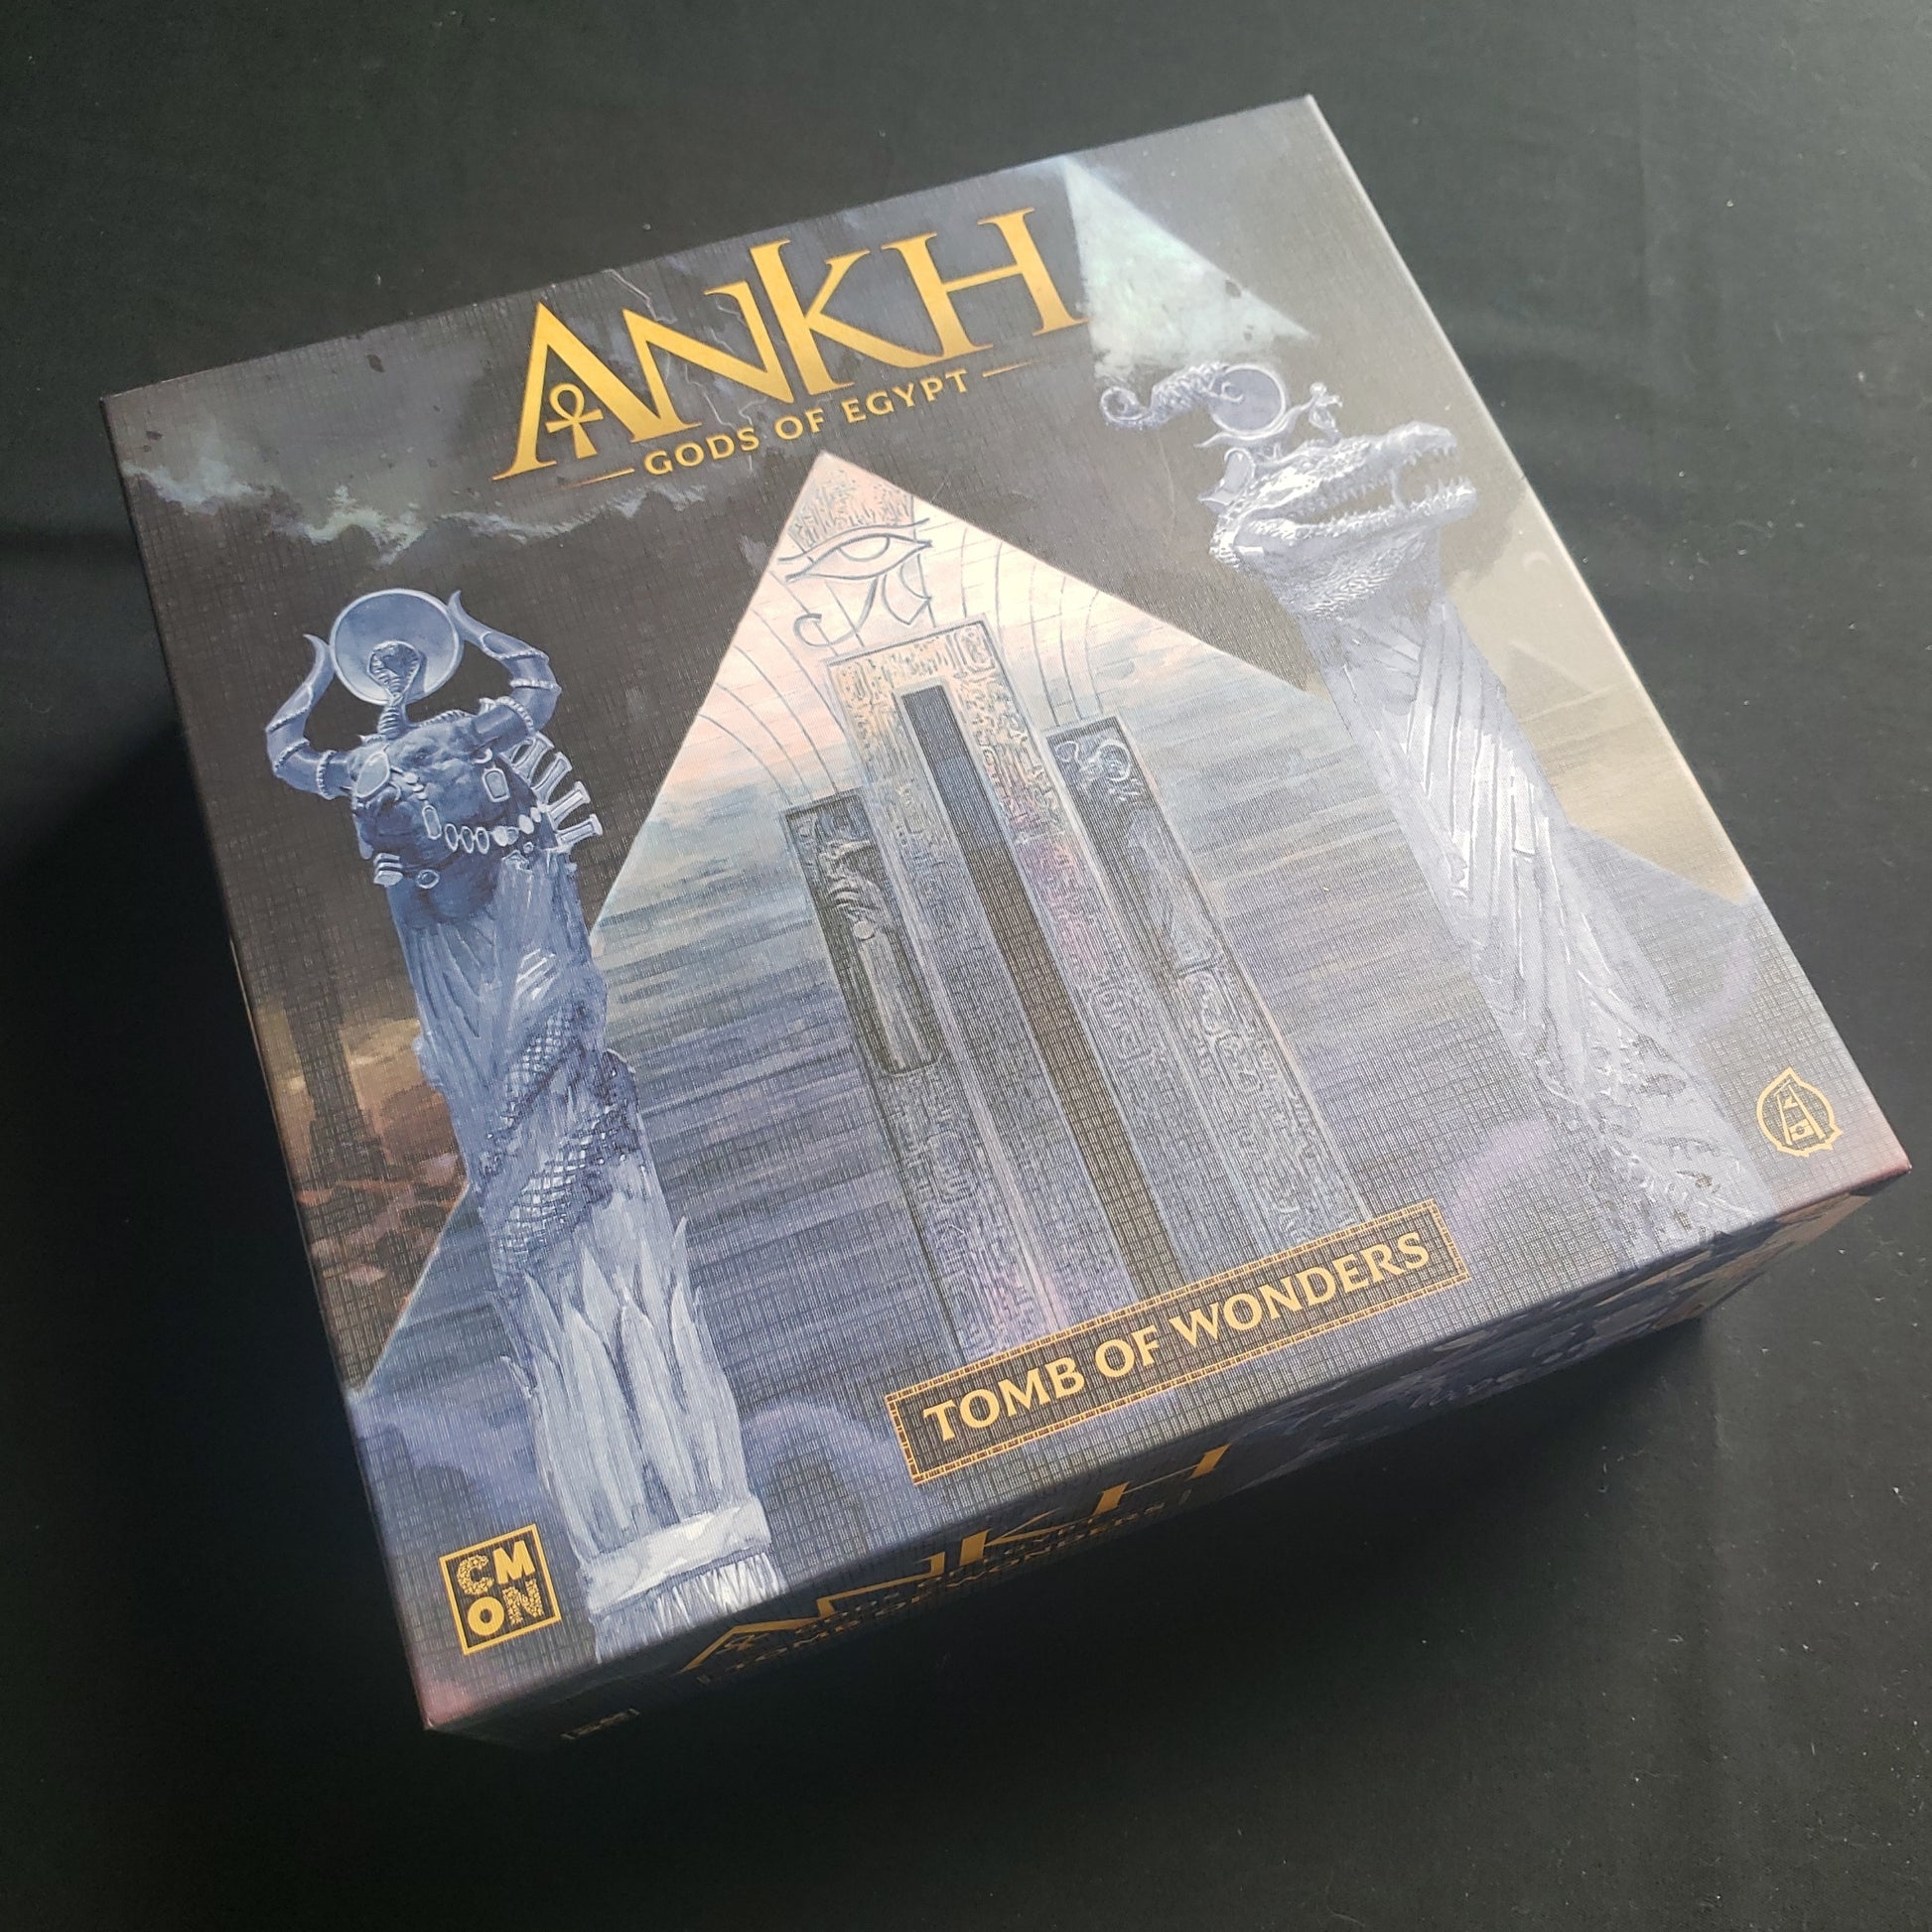 Image shows the front cover of the Tomb of Wonders stretch goals box for the Ankh: Gods of Egypt board game